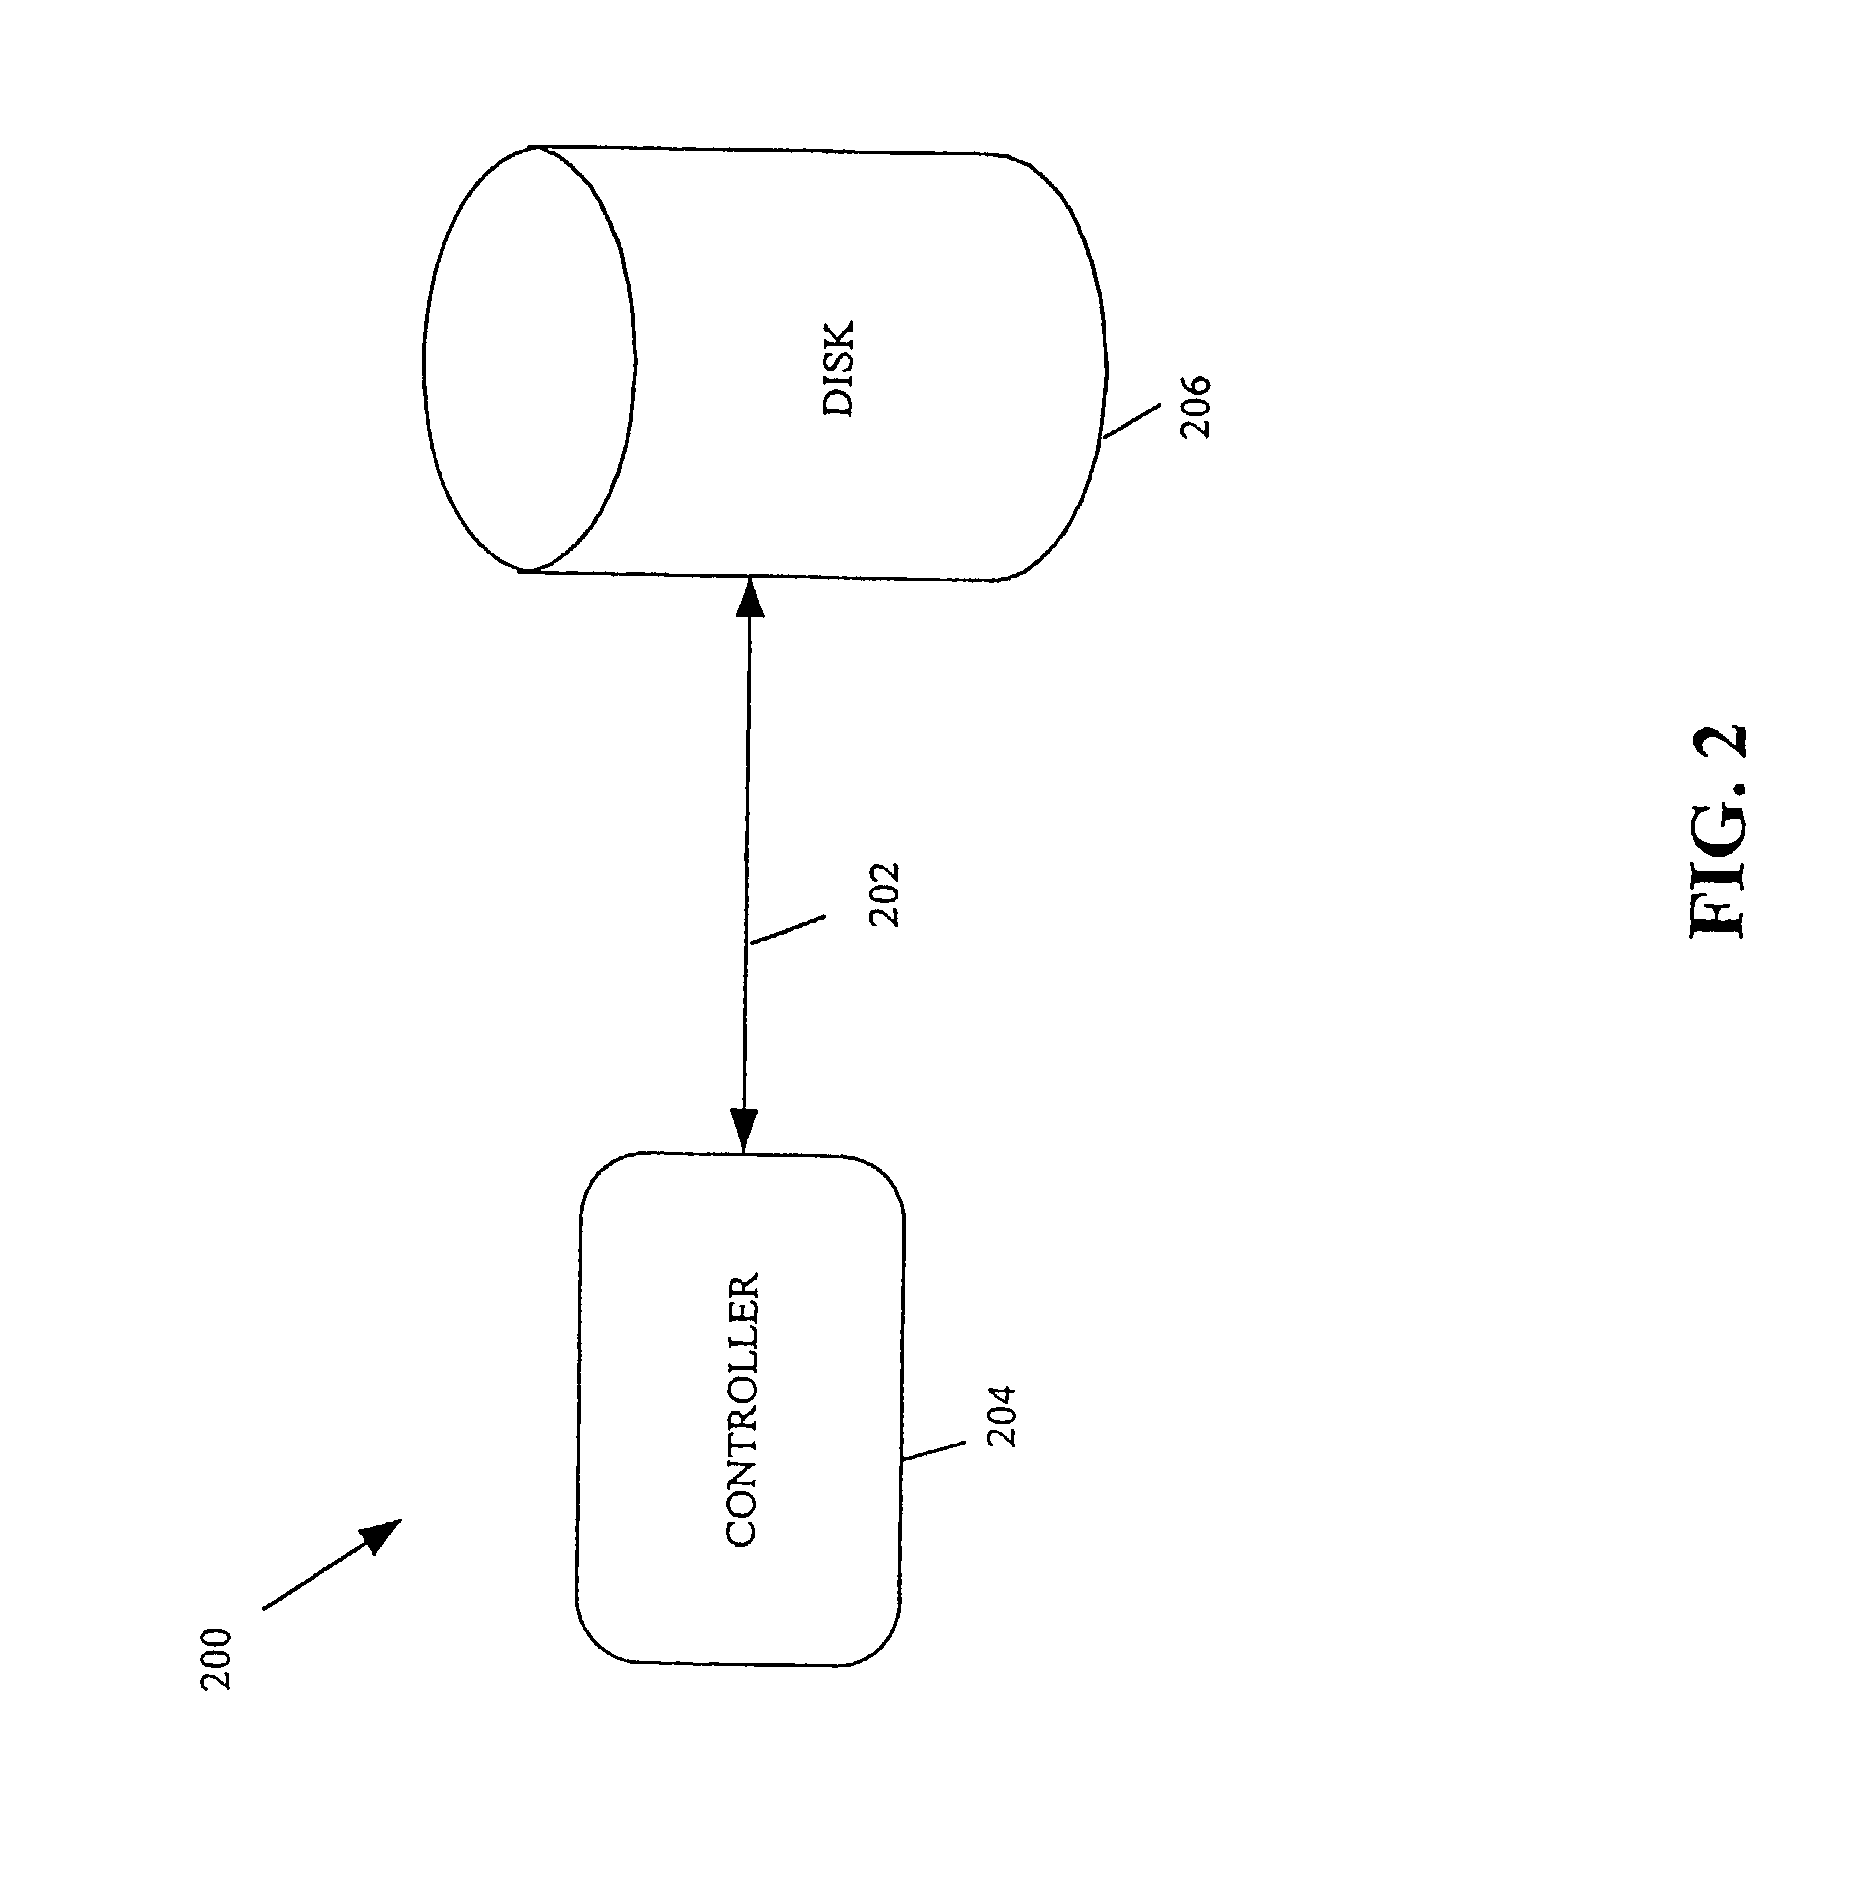 Interface circuits for modularized data optimization engines and methods therefor